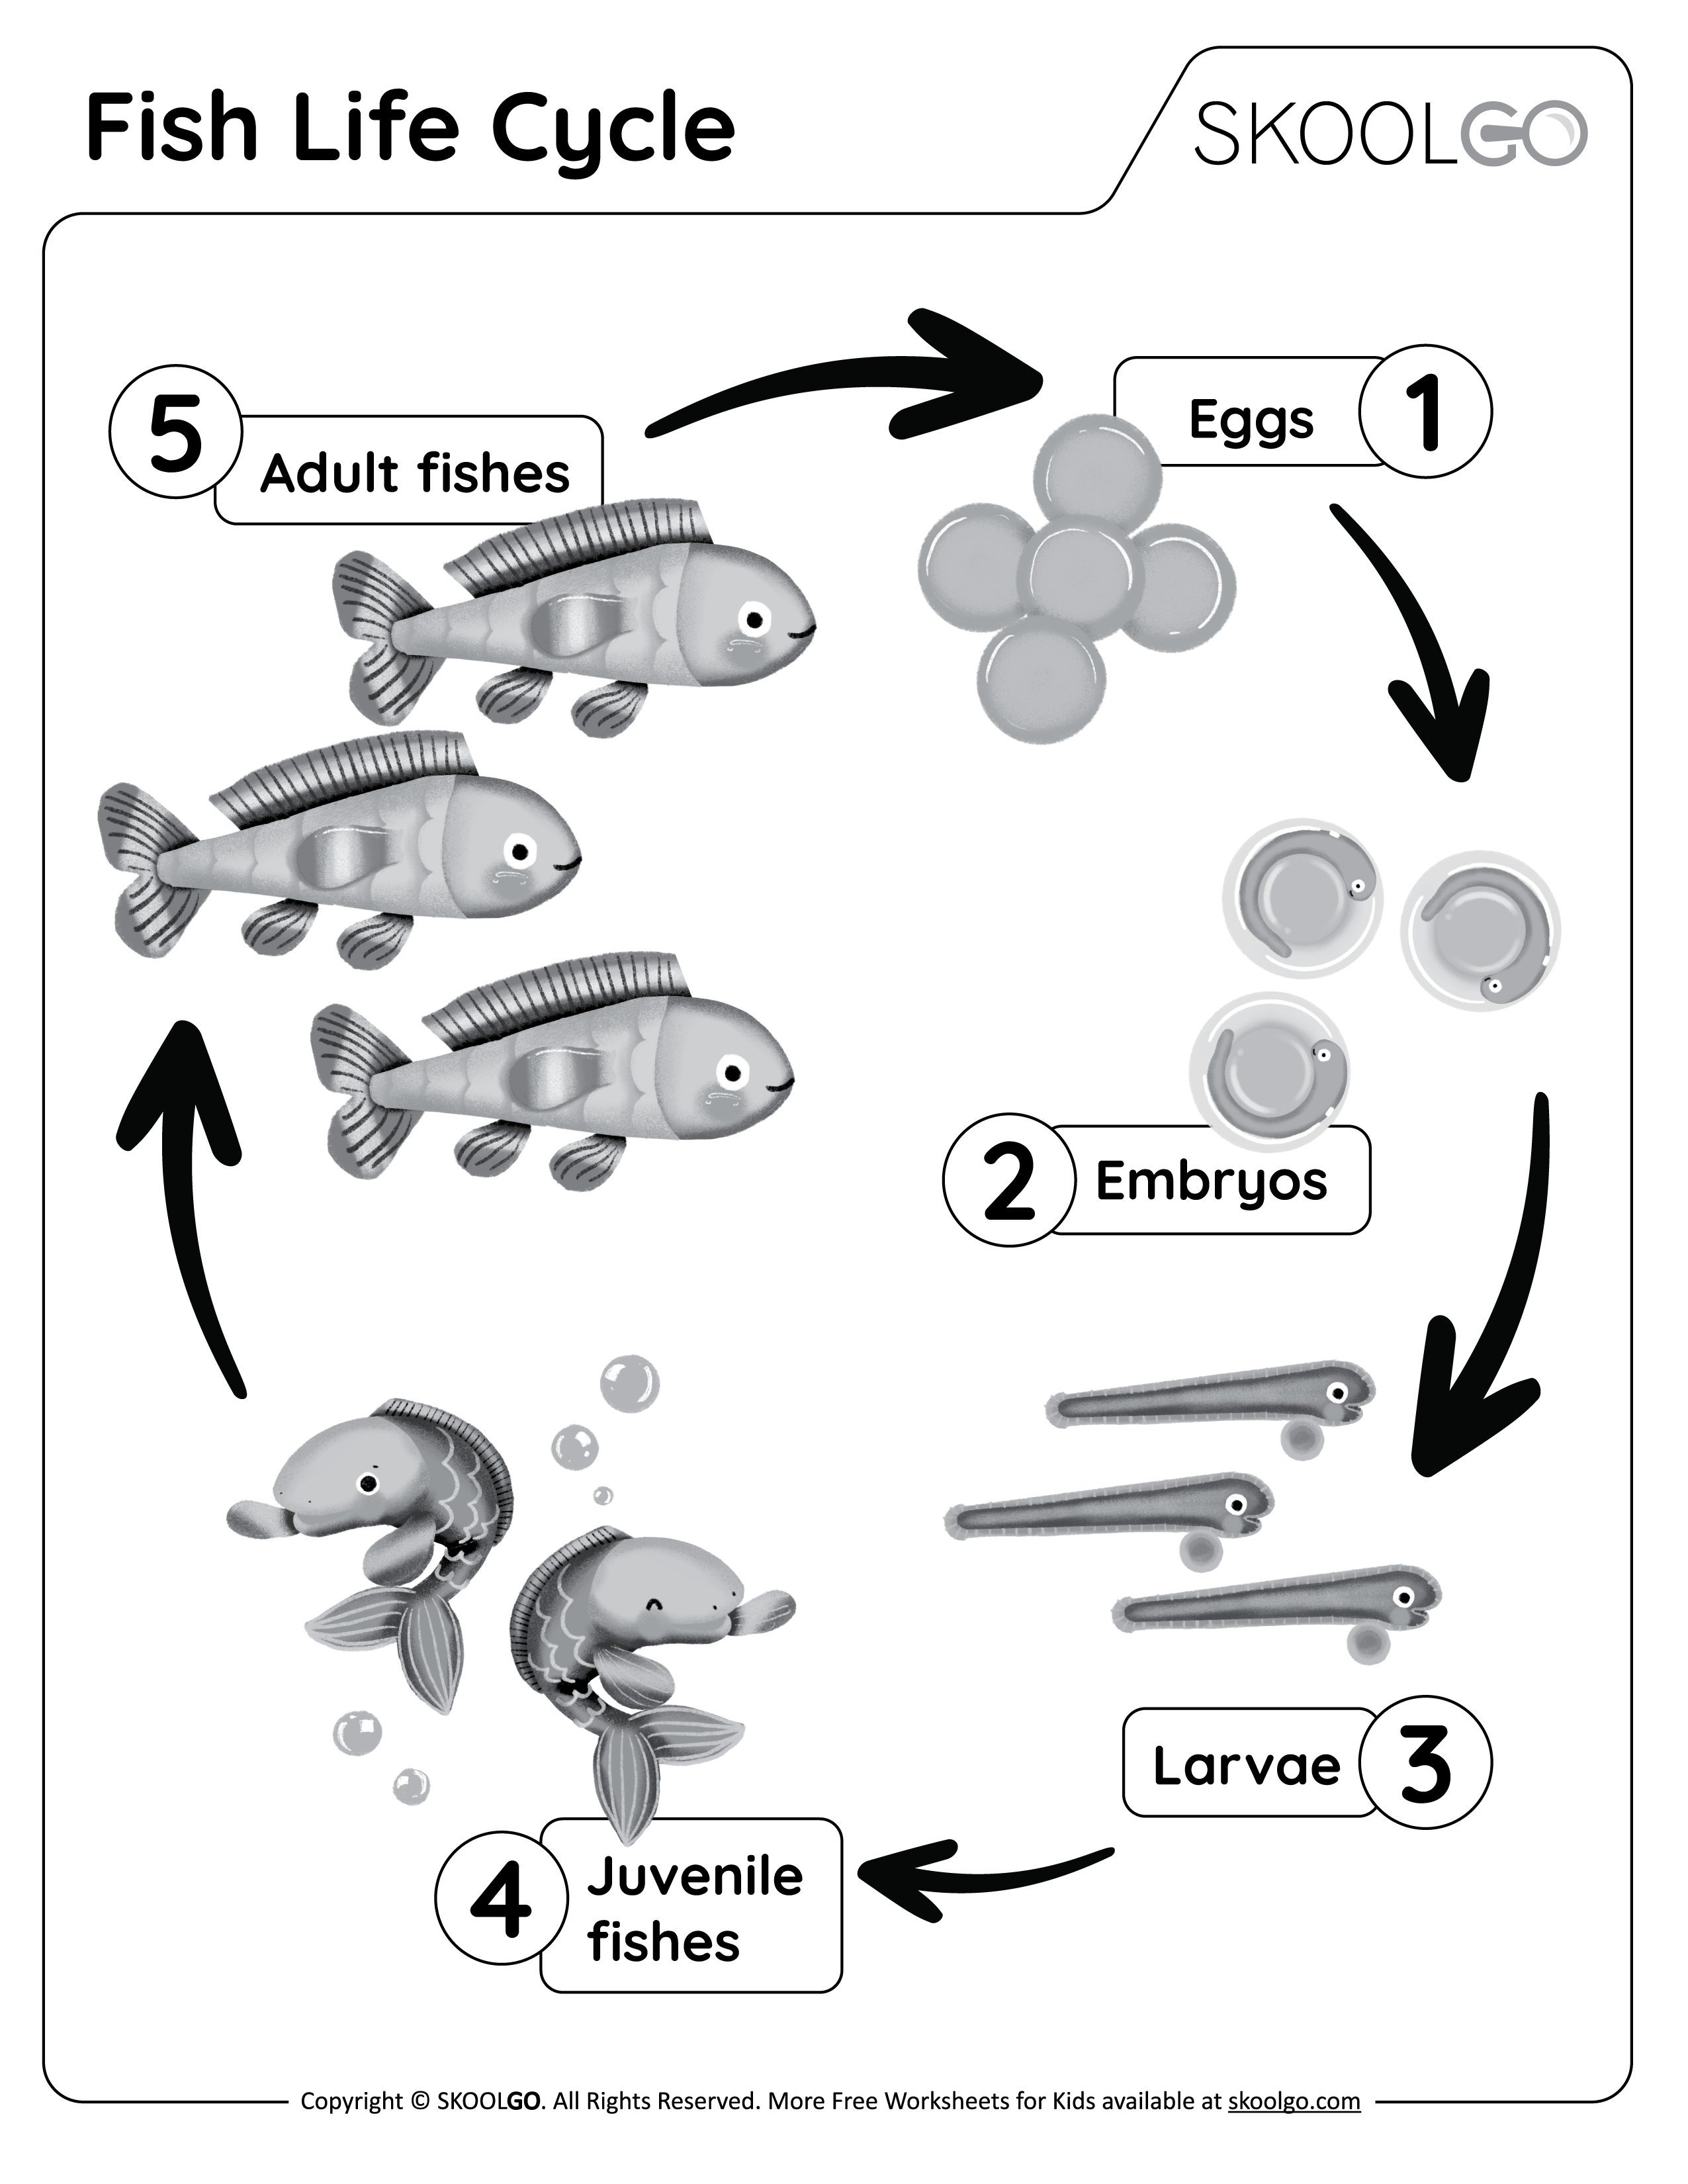 Fish Life Cycle - Free Worksheet for Kids - Black and White